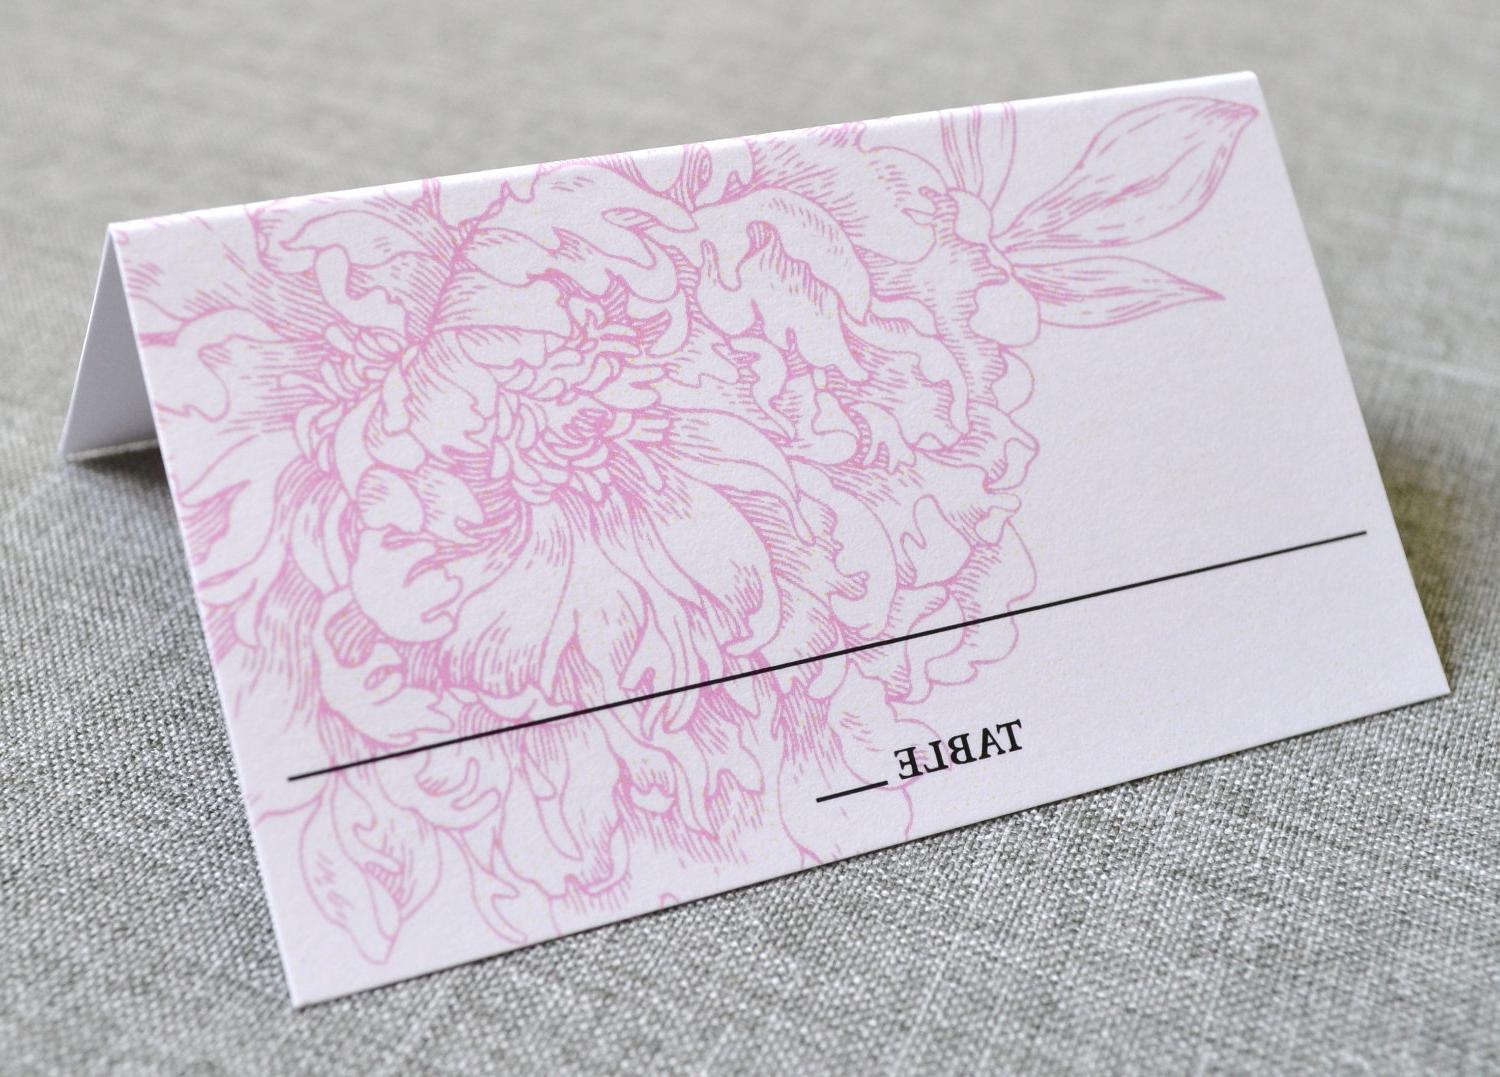 These folded cards coordinate with the Felicia  pink peonies  wedding